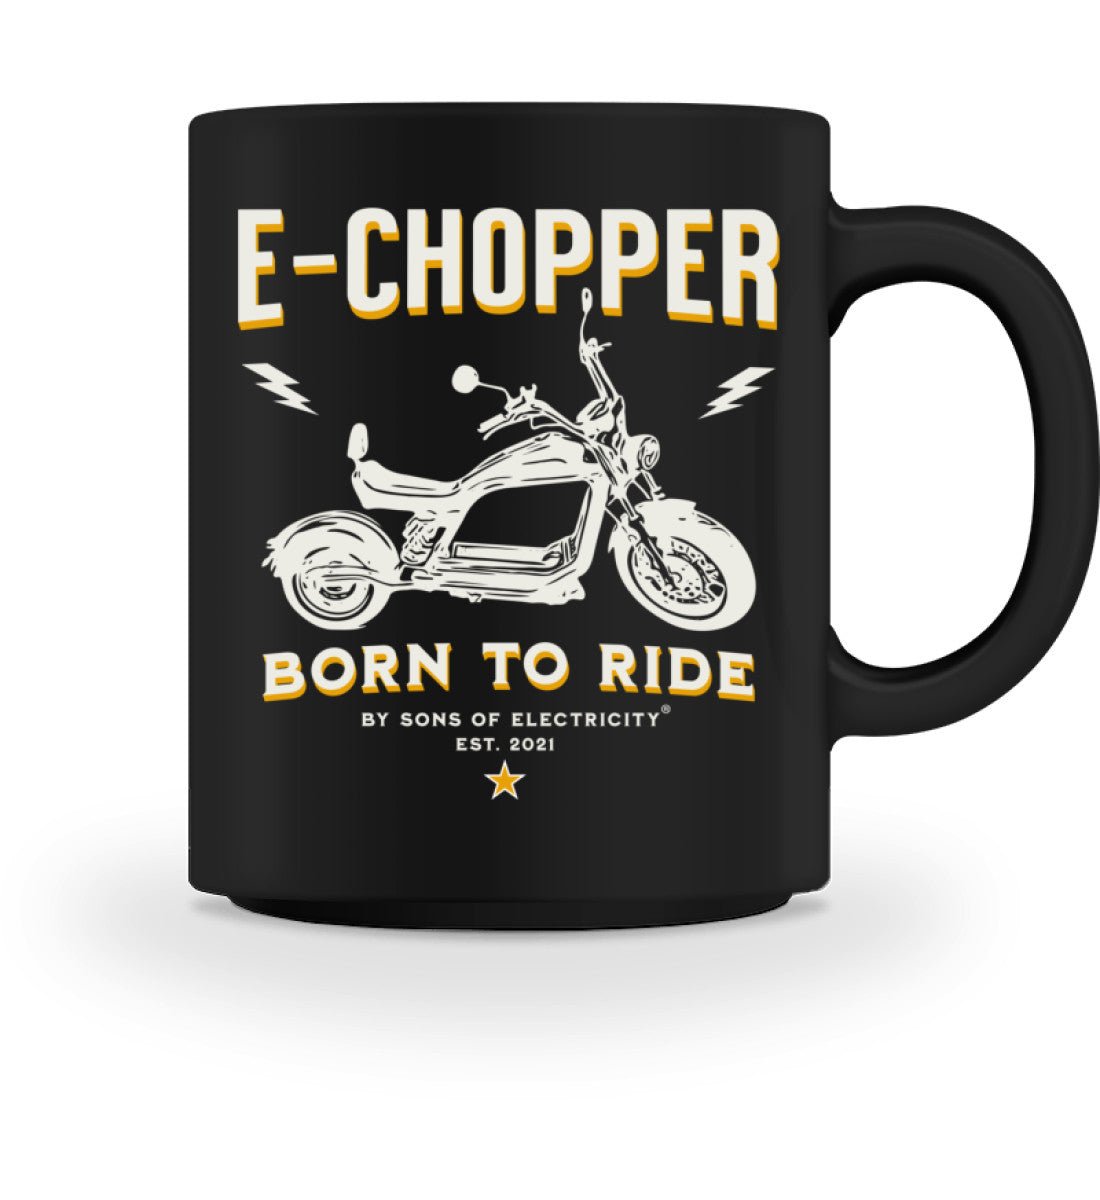 E-Chopper (2) Tasse: SONS OF ELECTRICITY Born To Ride -